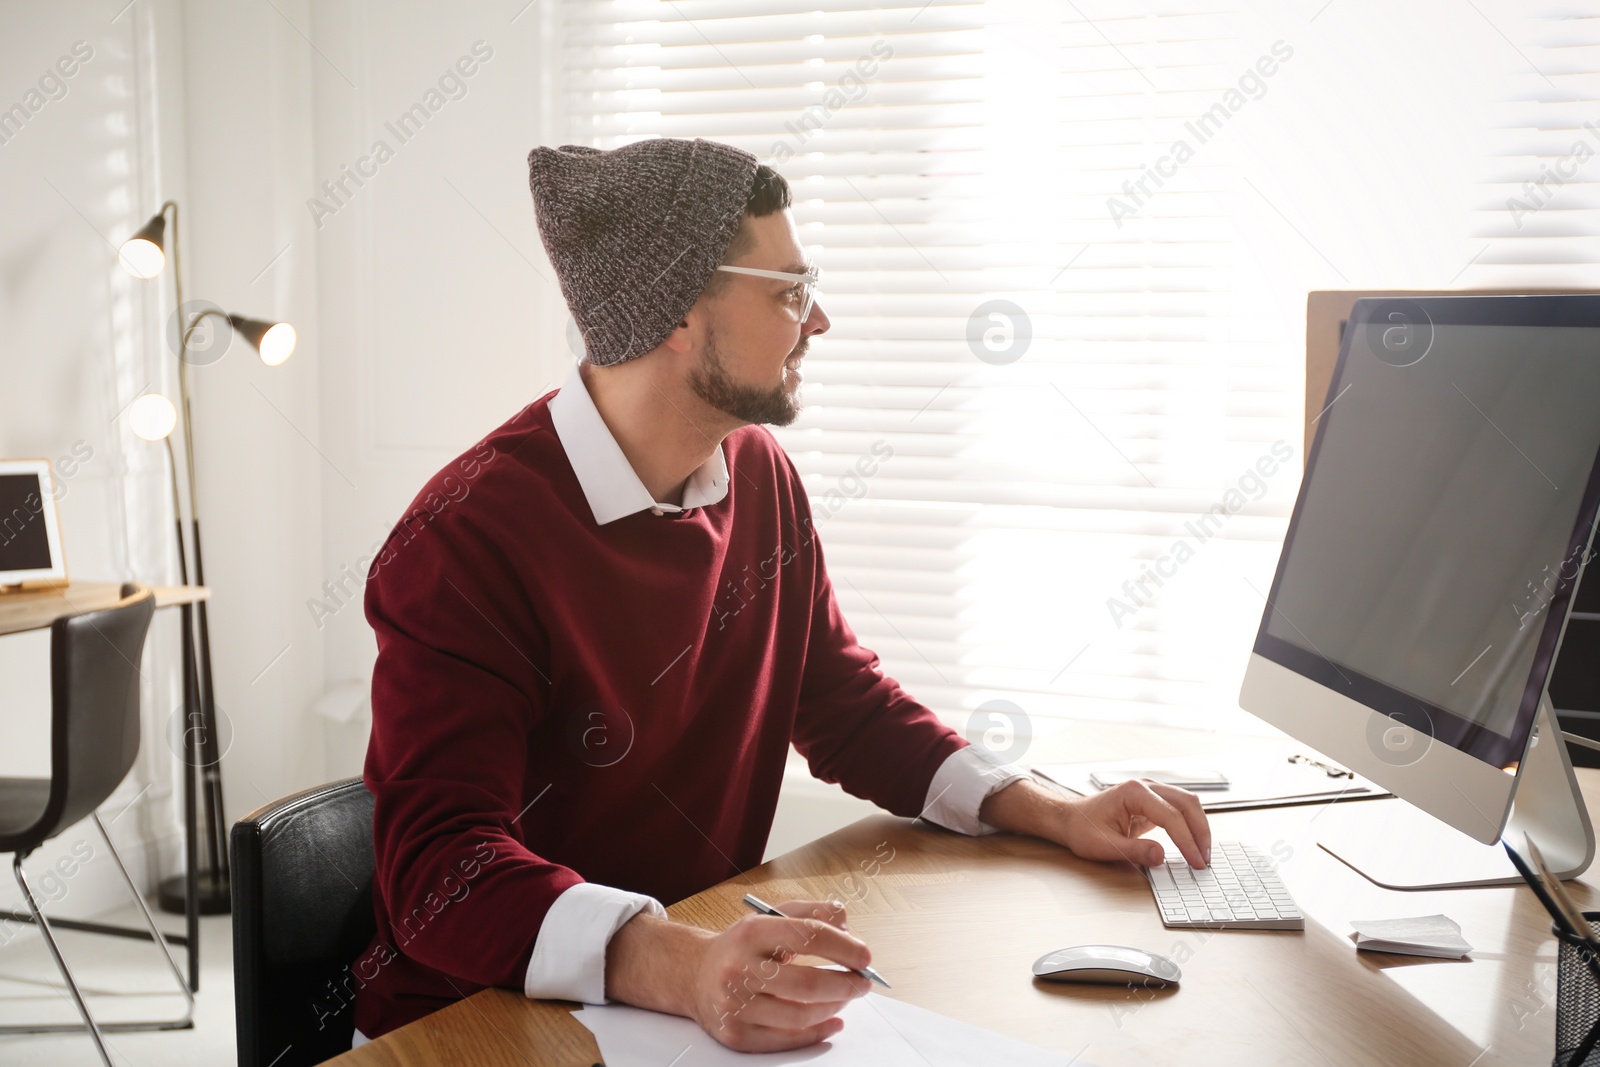 Photo of Freelancer working on computer at table indoors